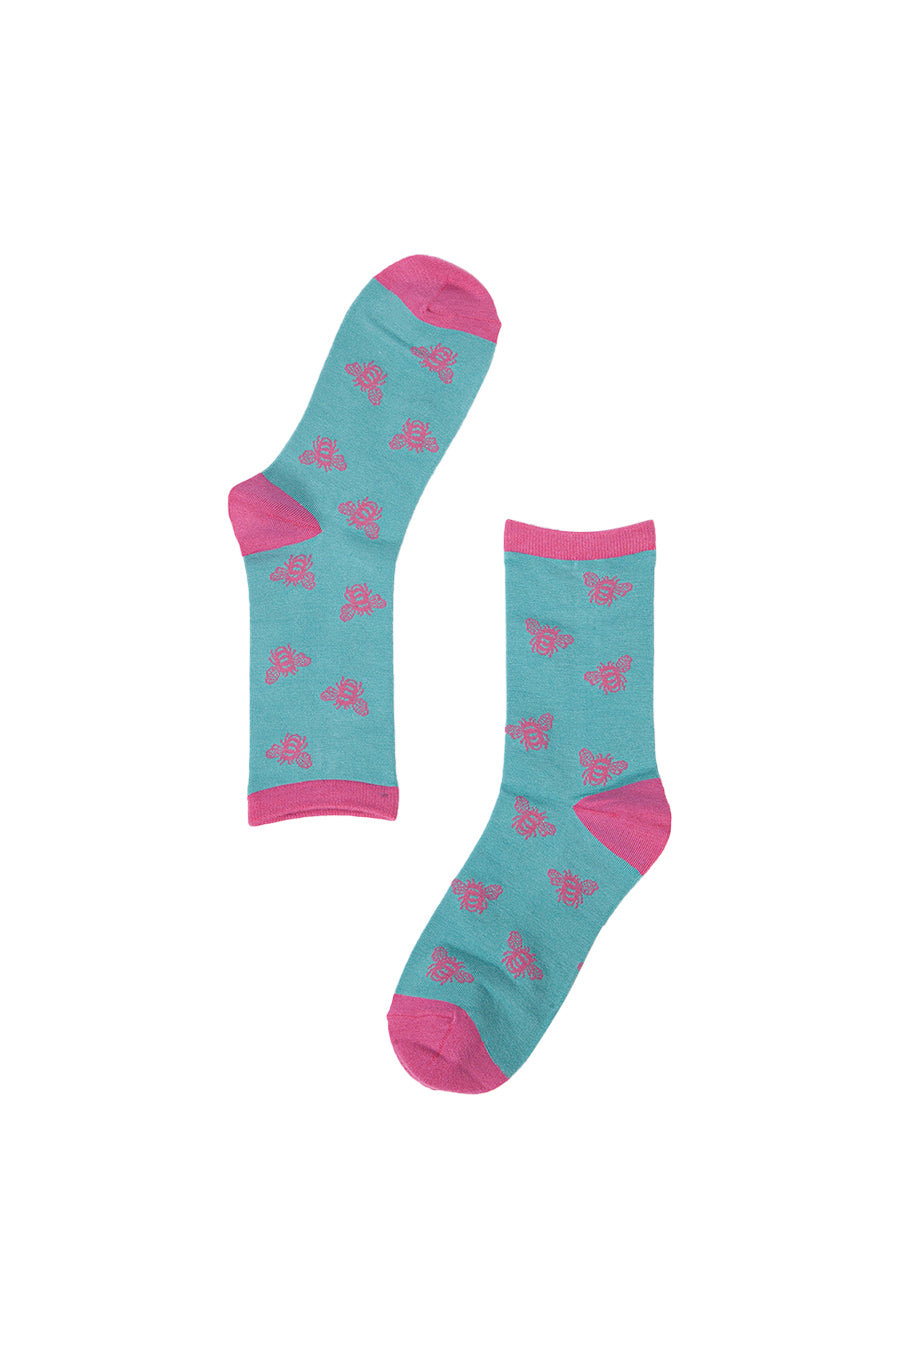 teal ankle socks with pink bees on them